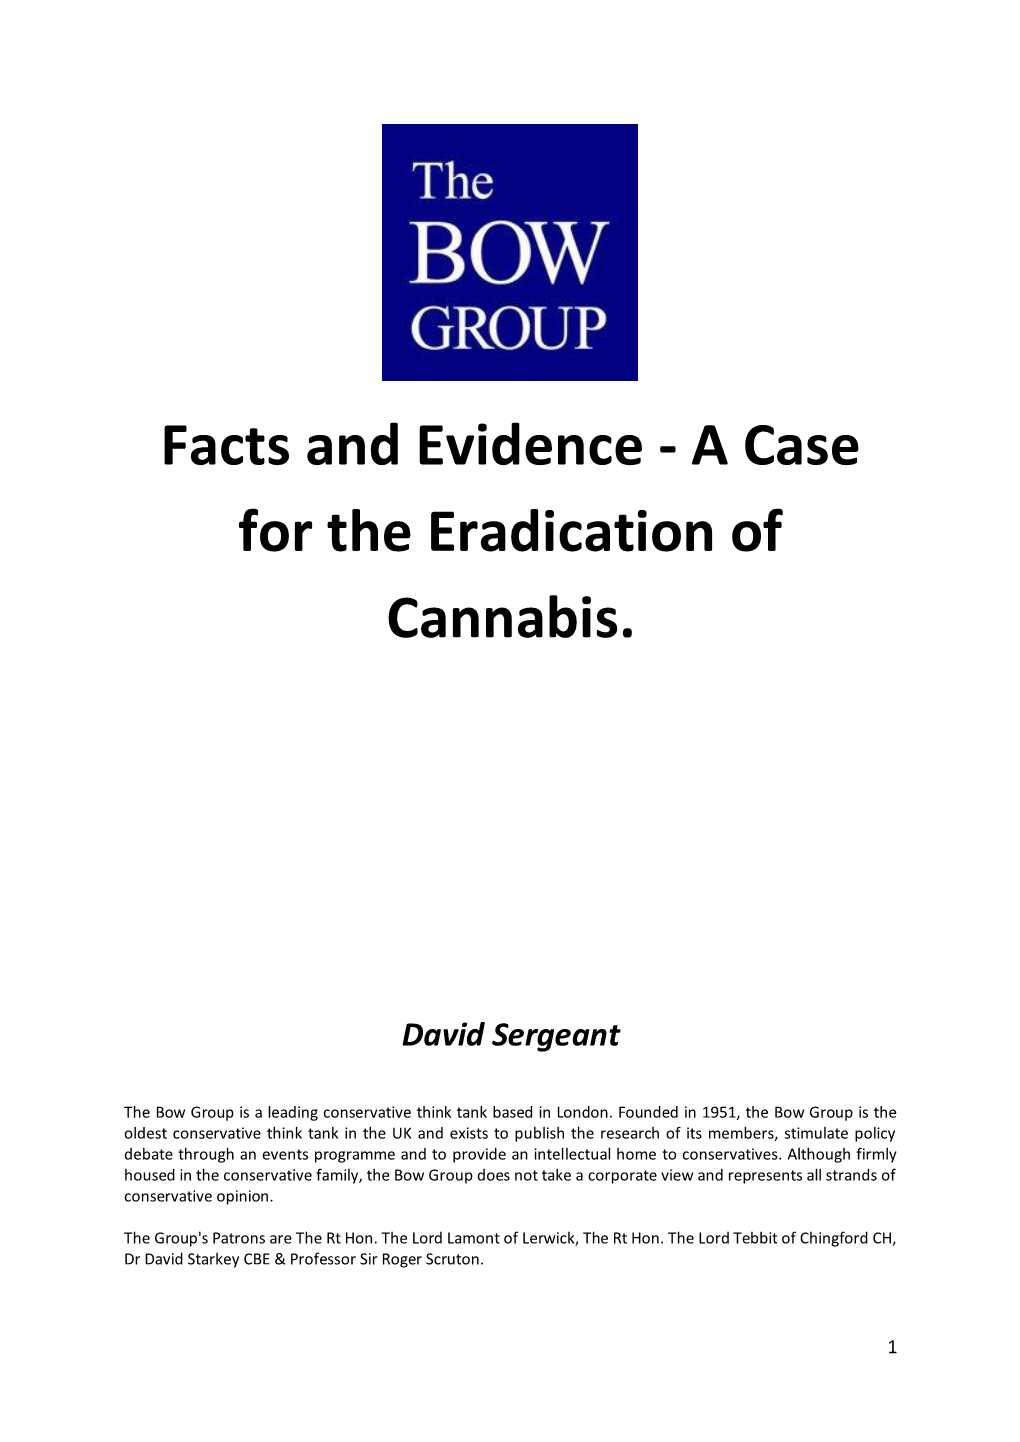 Facts and Evidence - a Case for the Eradication of Cannabis